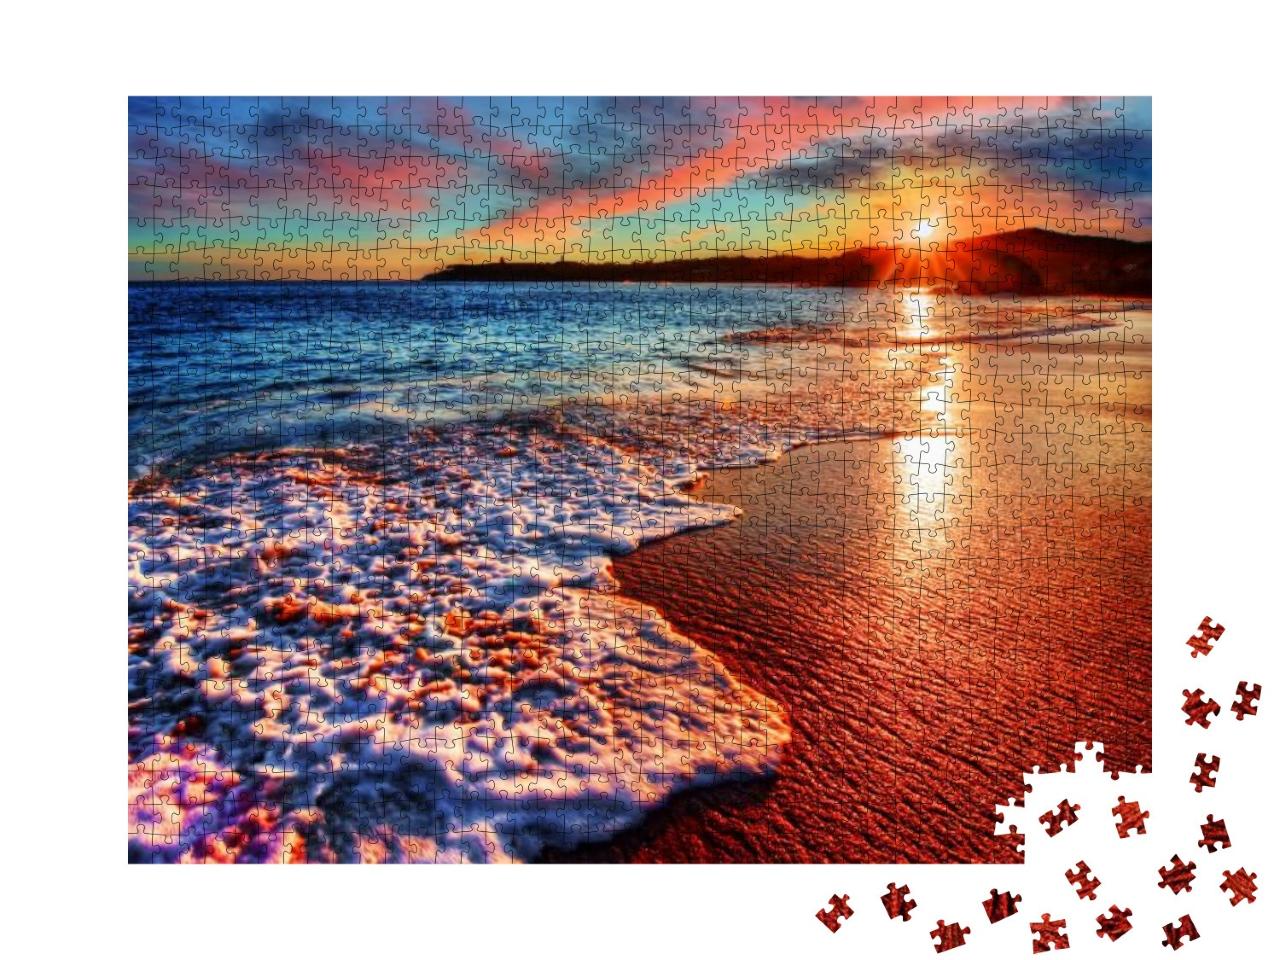 Brilliant Vacation Destination Beach Sunrise with Colorfu... Jigsaw Puzzle with 1000 pieces